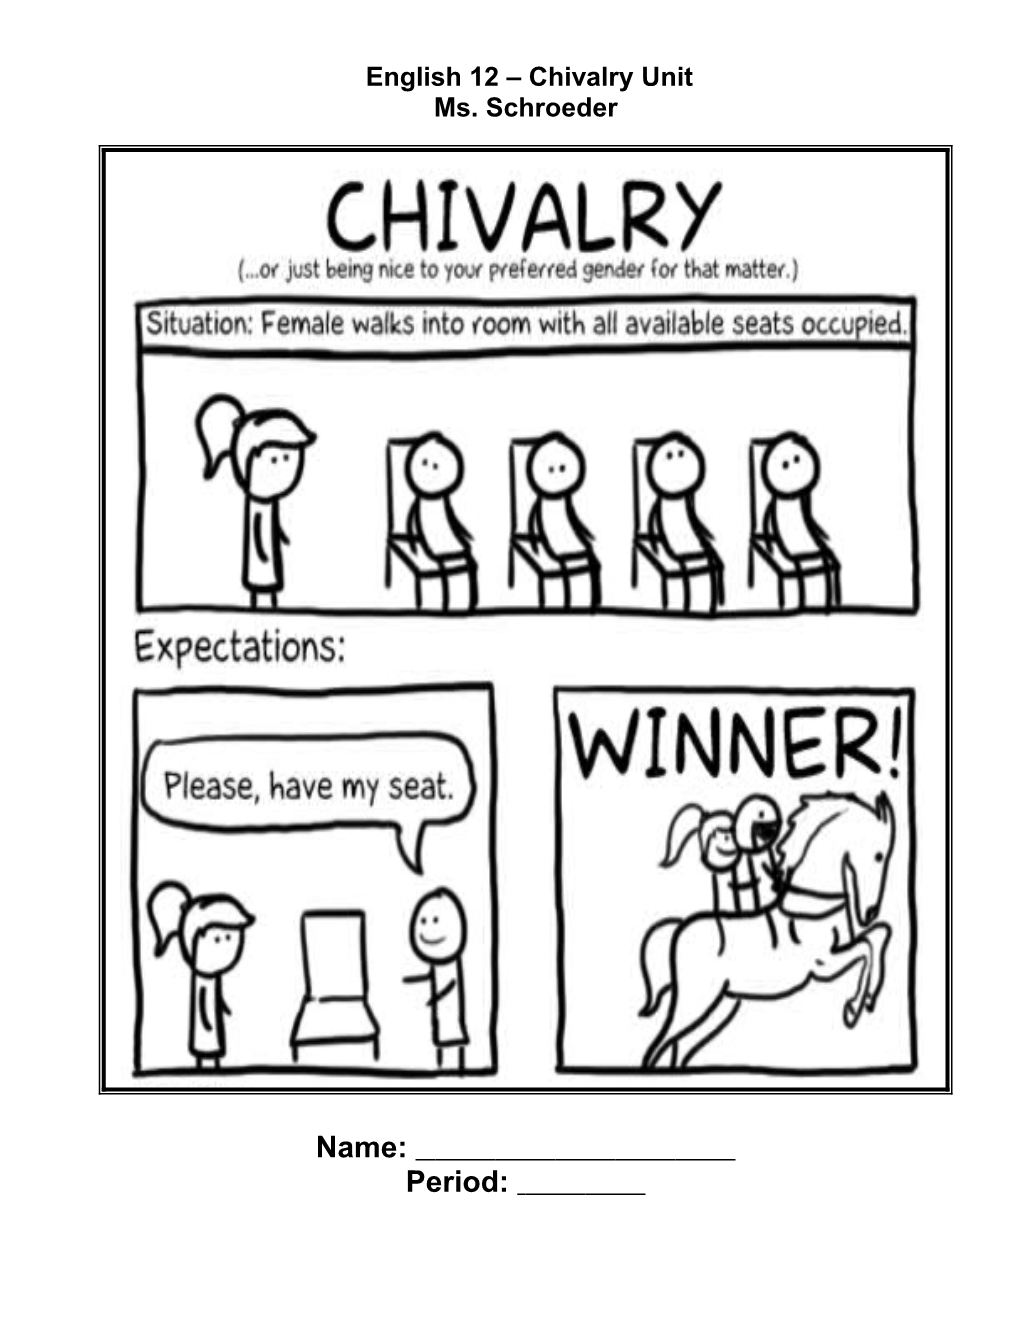 The Ten Commandments of the Code of Chivalry